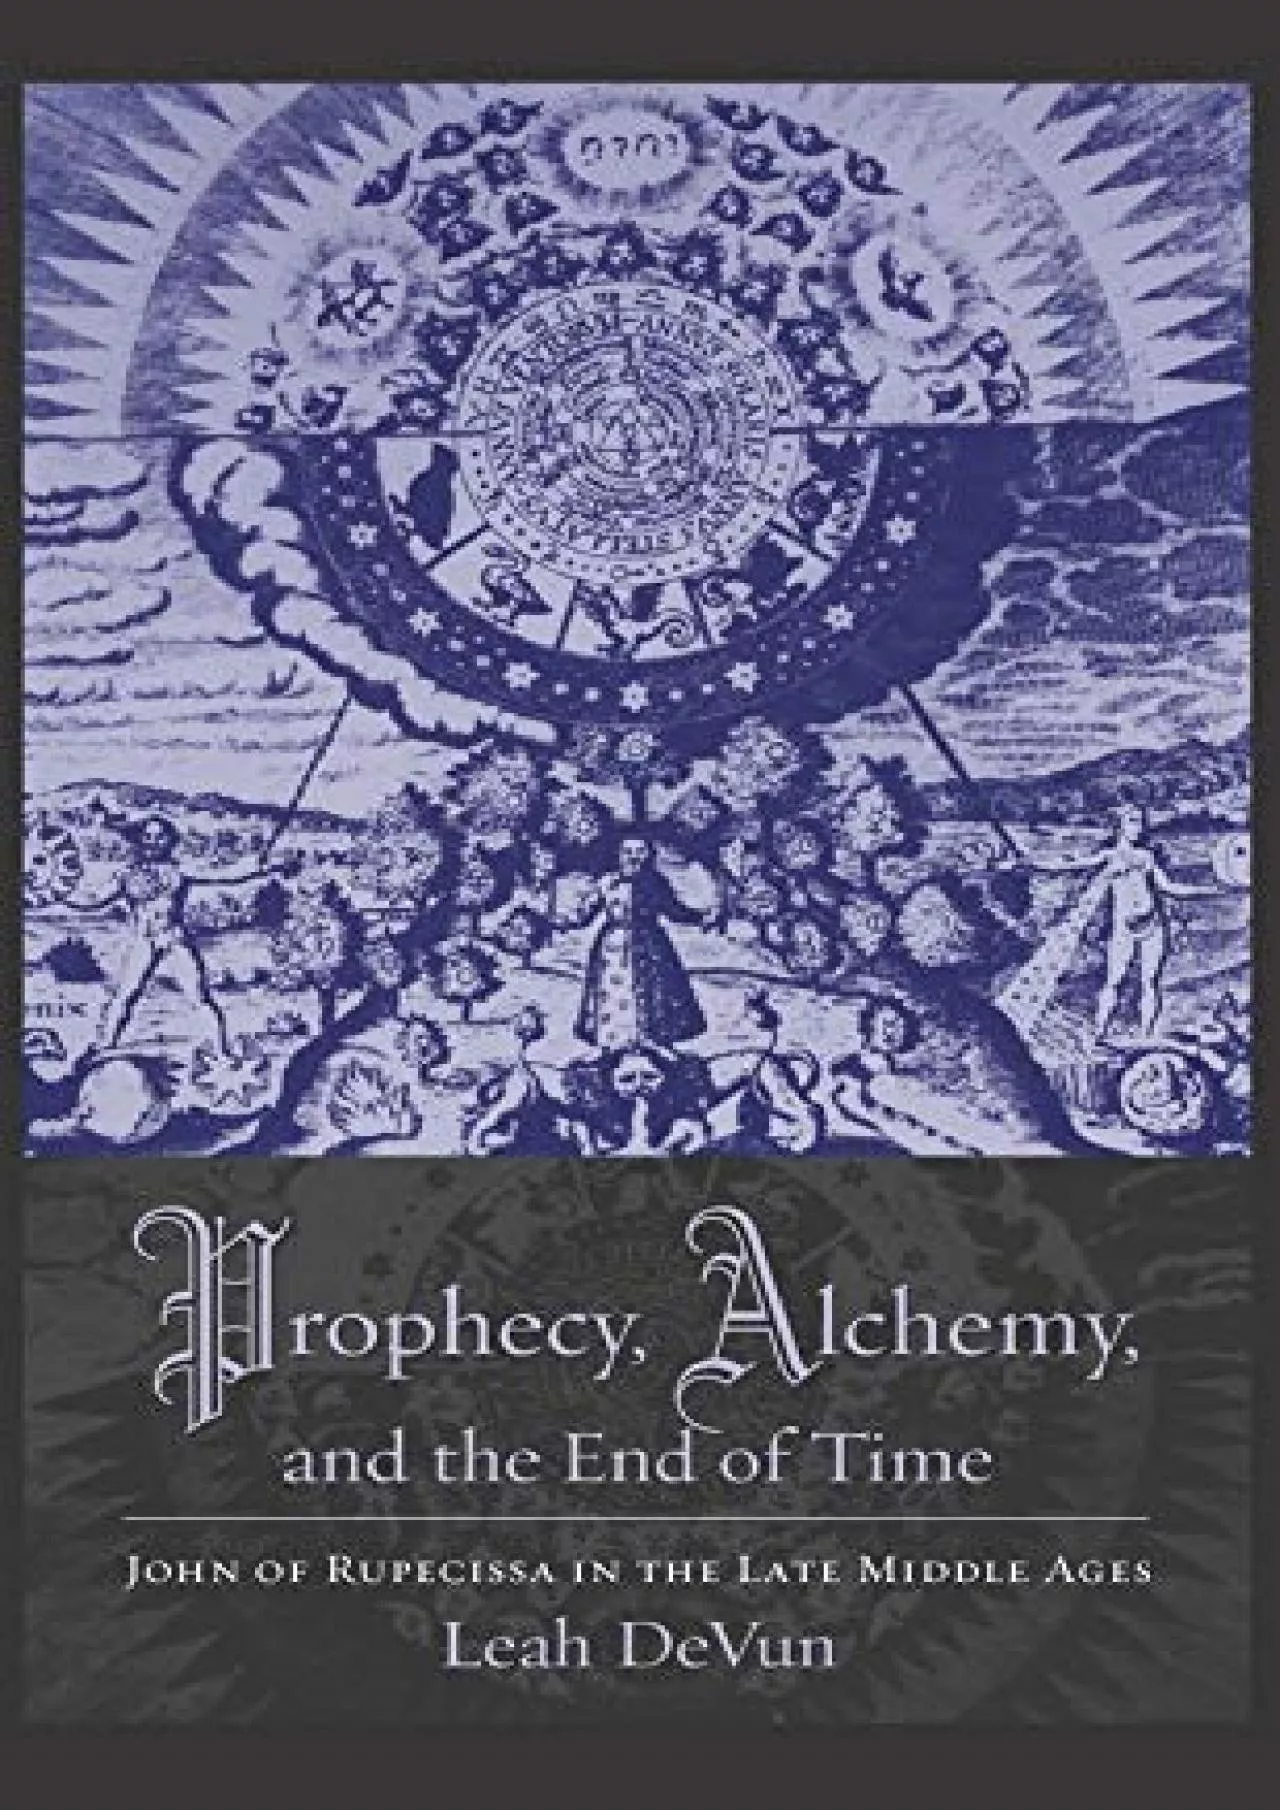 [DOWNLOAD]-Prophecy, Alchemy, and the End of Time: John of Rupescissa in the Late Middle